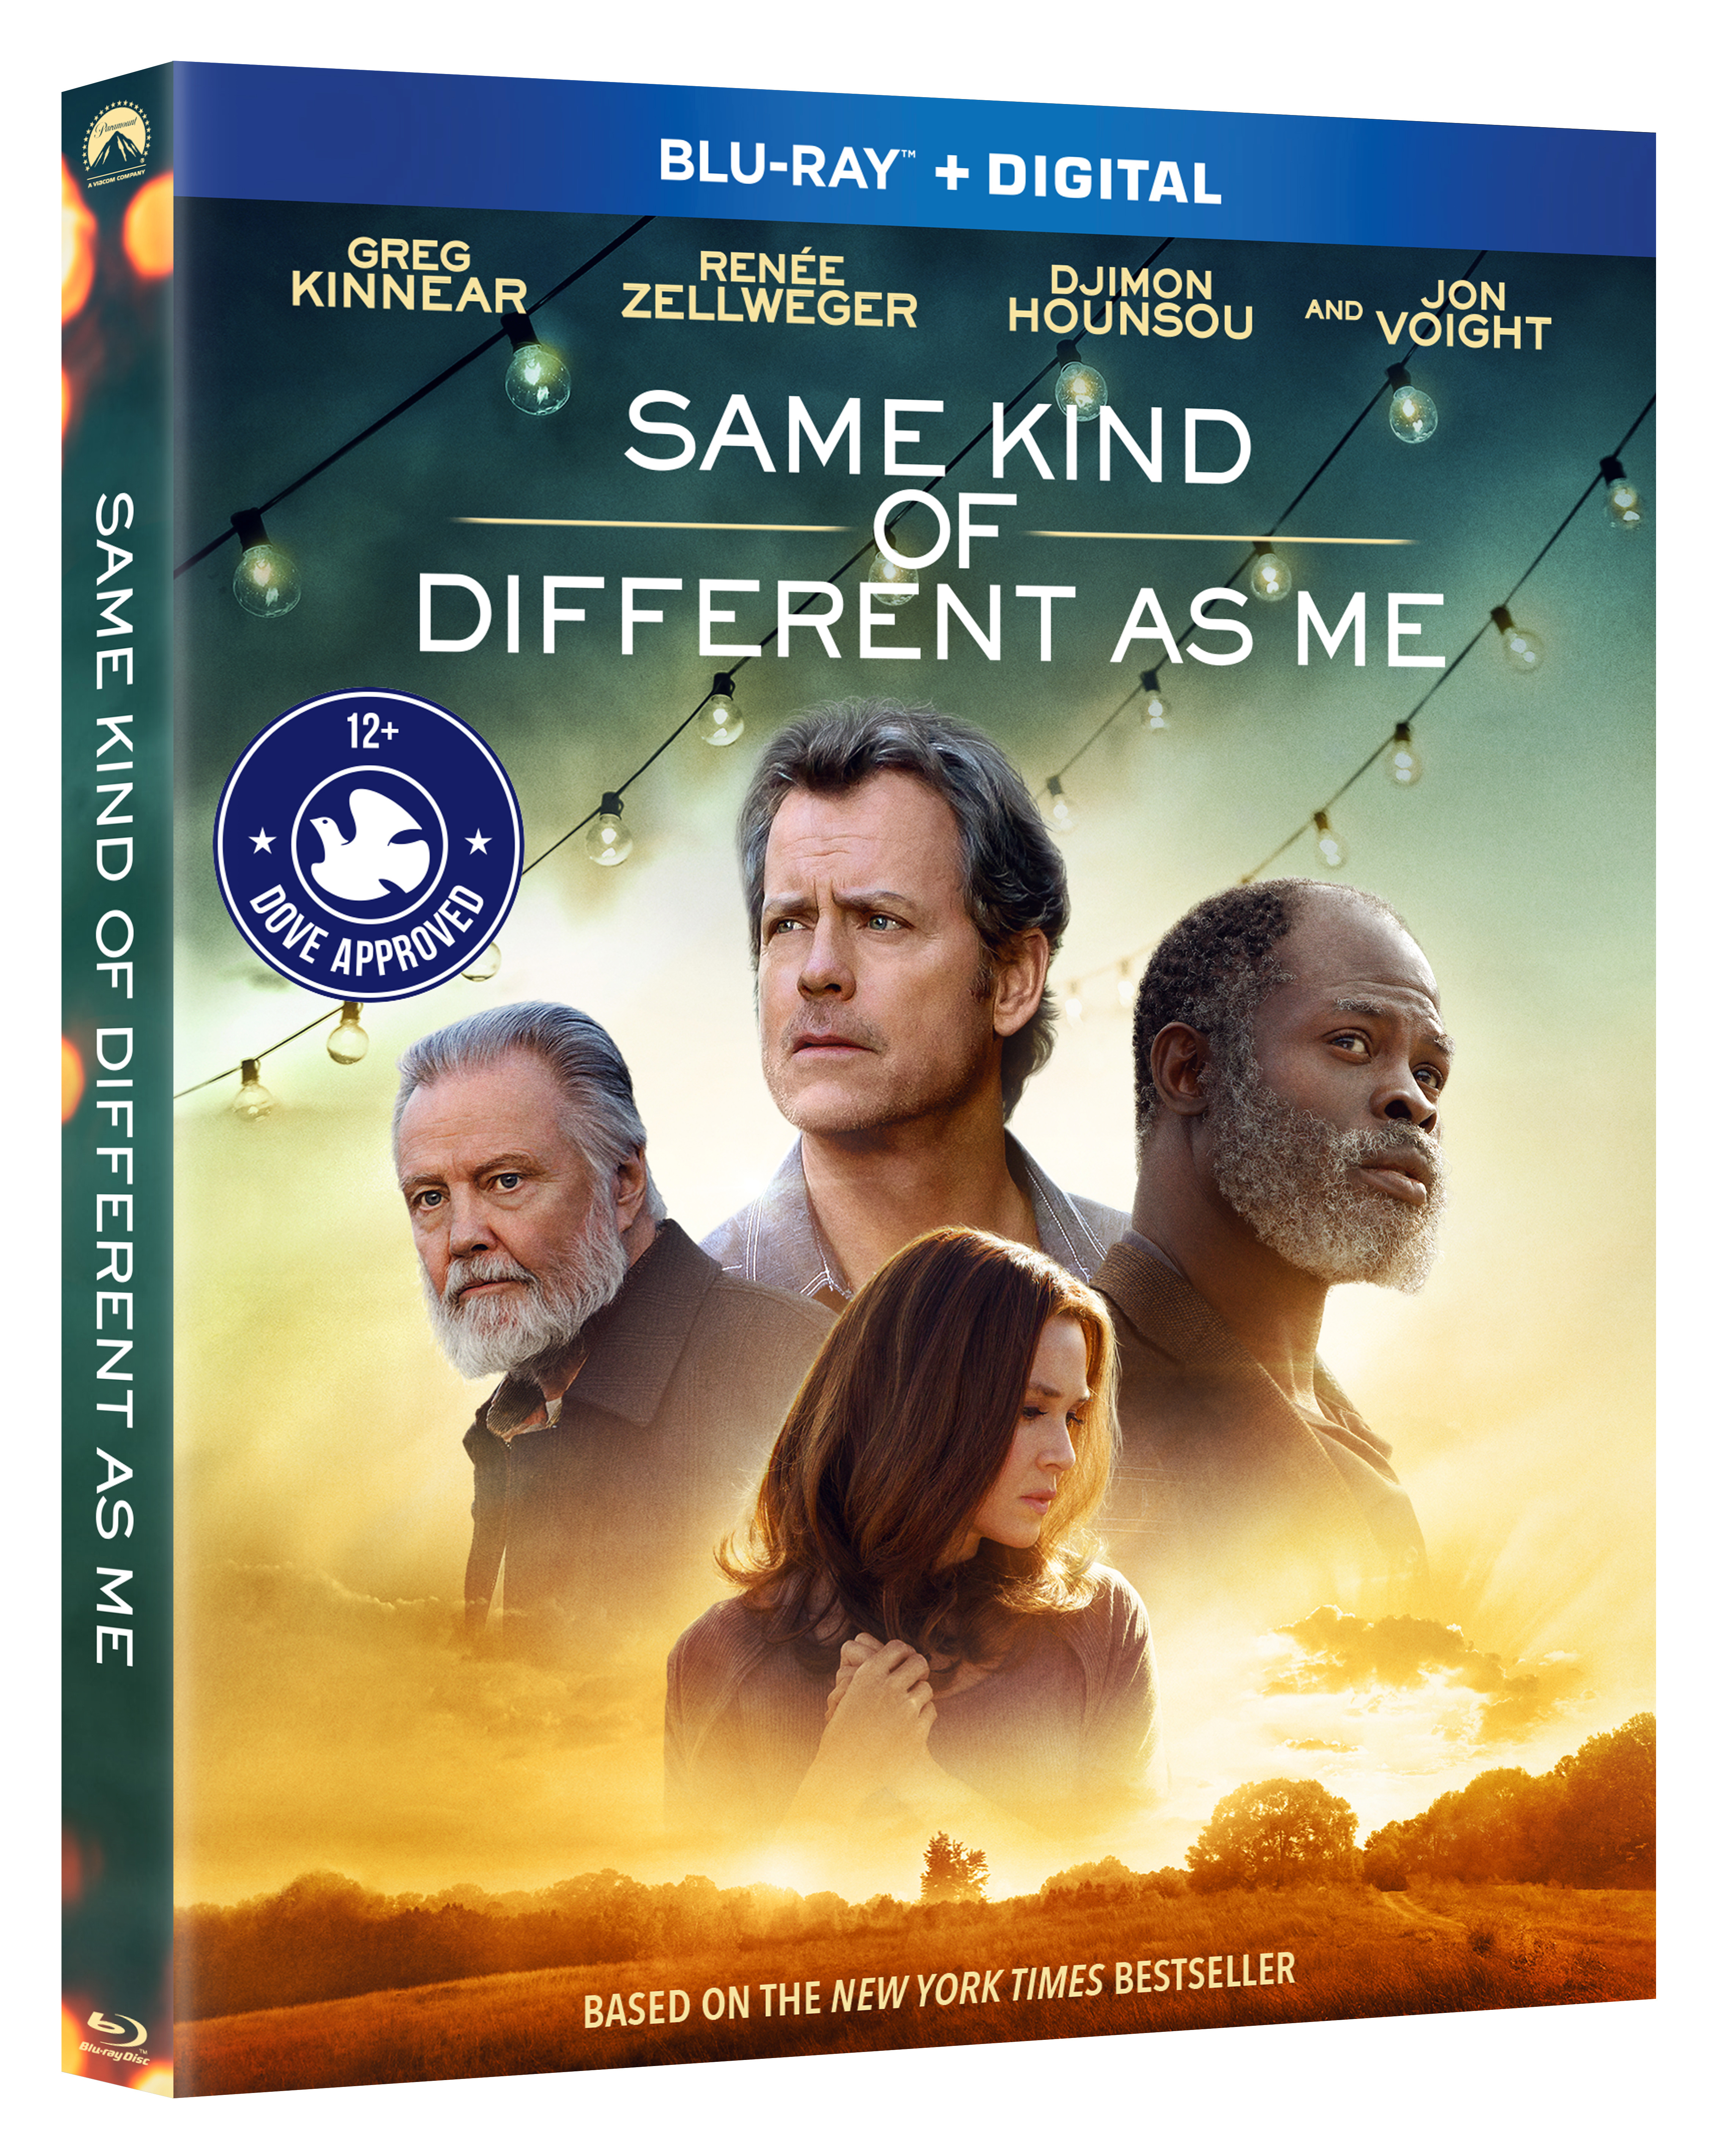 Same Kind Of Different As Me Blu-Ray/Digital cover (Paramount Home Entertainment)